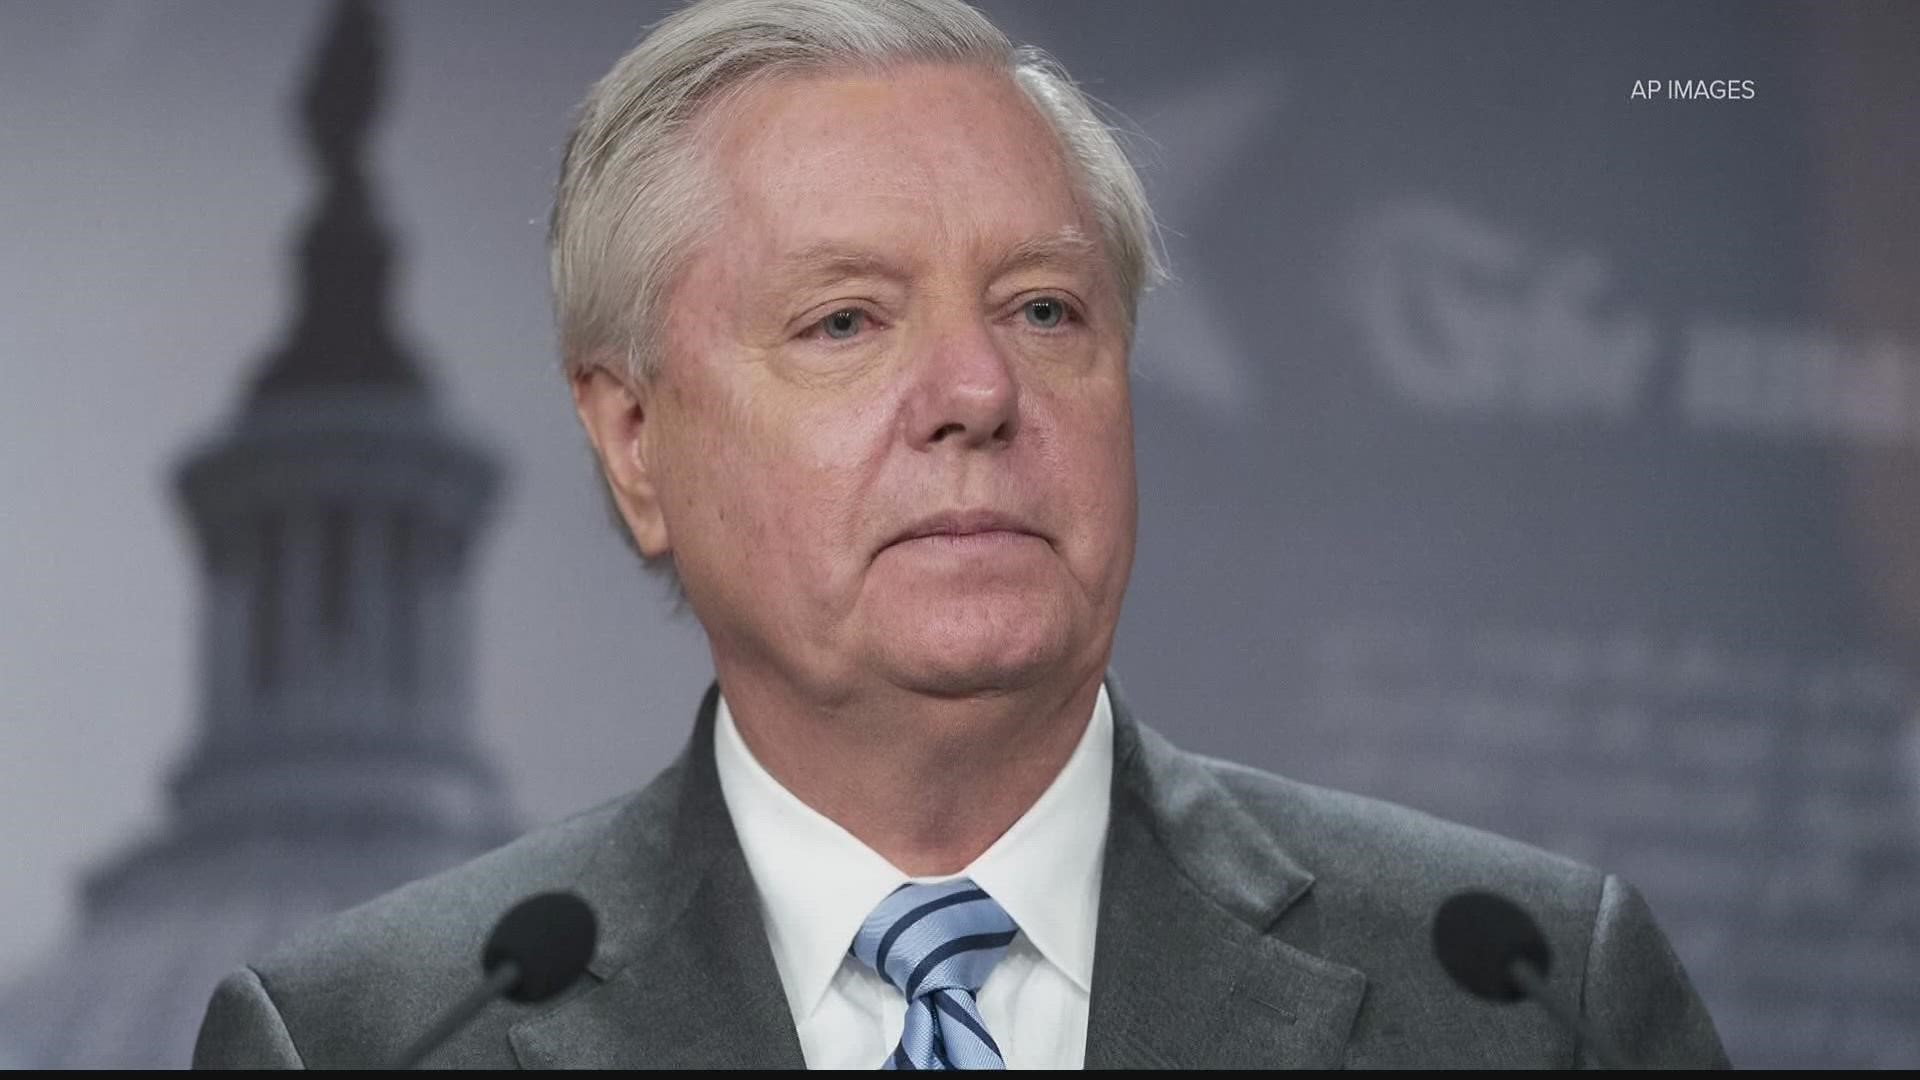 Senator Lindsey Graham is formally appealing a judge's order for him to testify before a special grand jury in Fulton County.